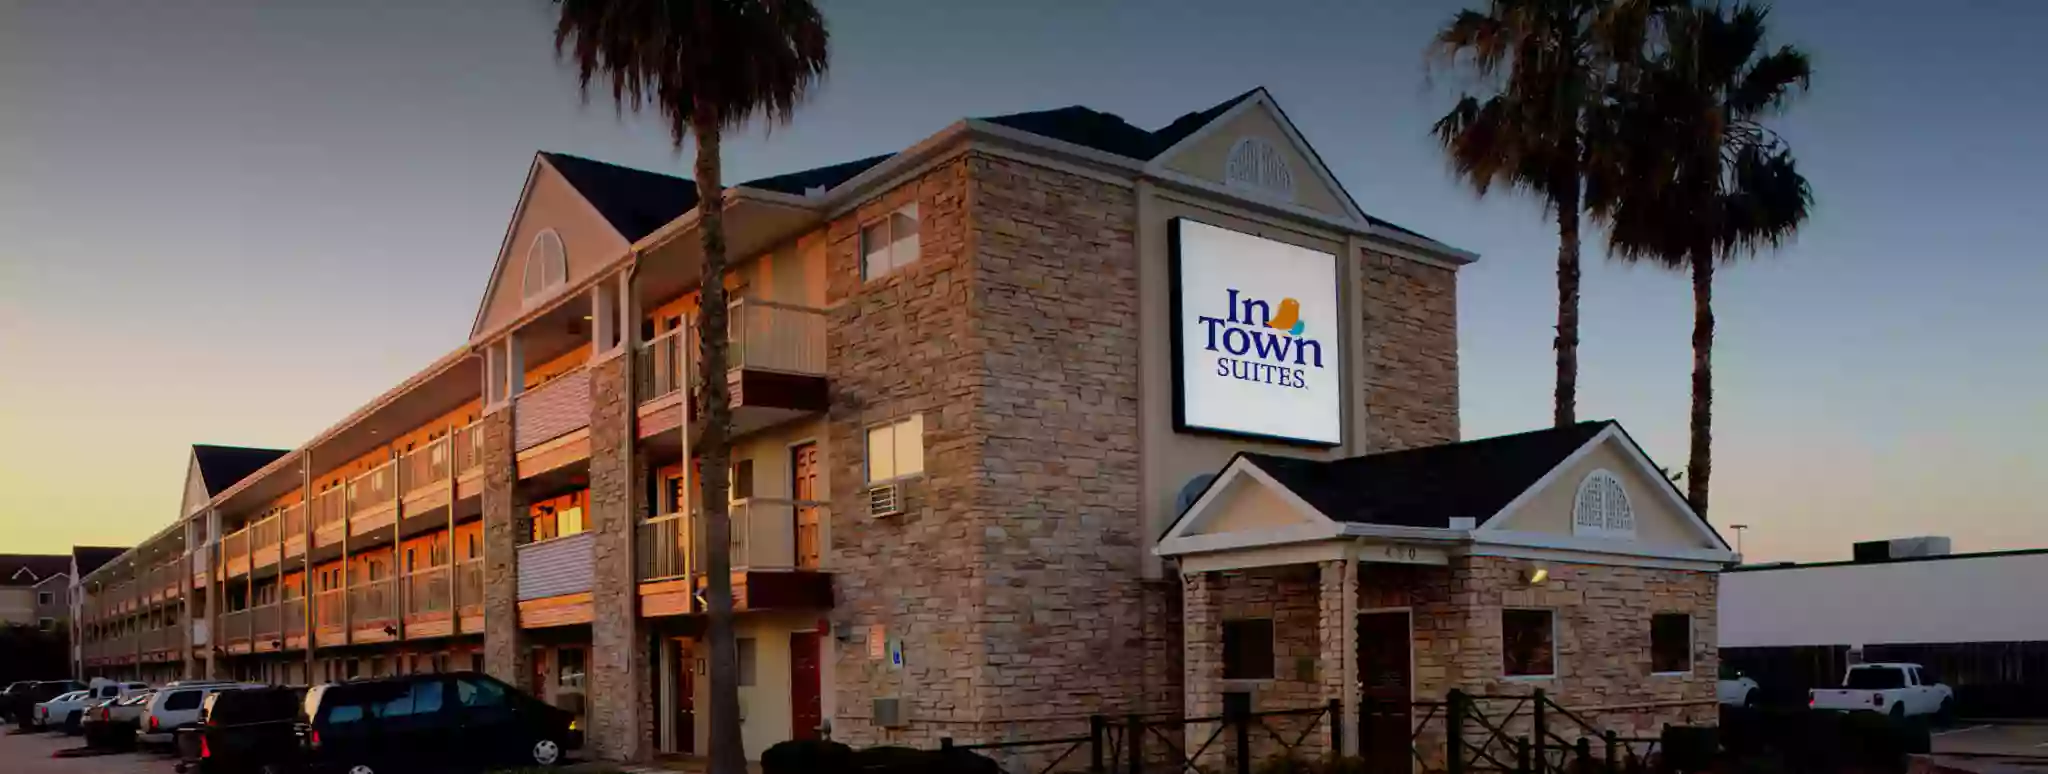 InTown Suites Extended Stay Houston TX - Westchase